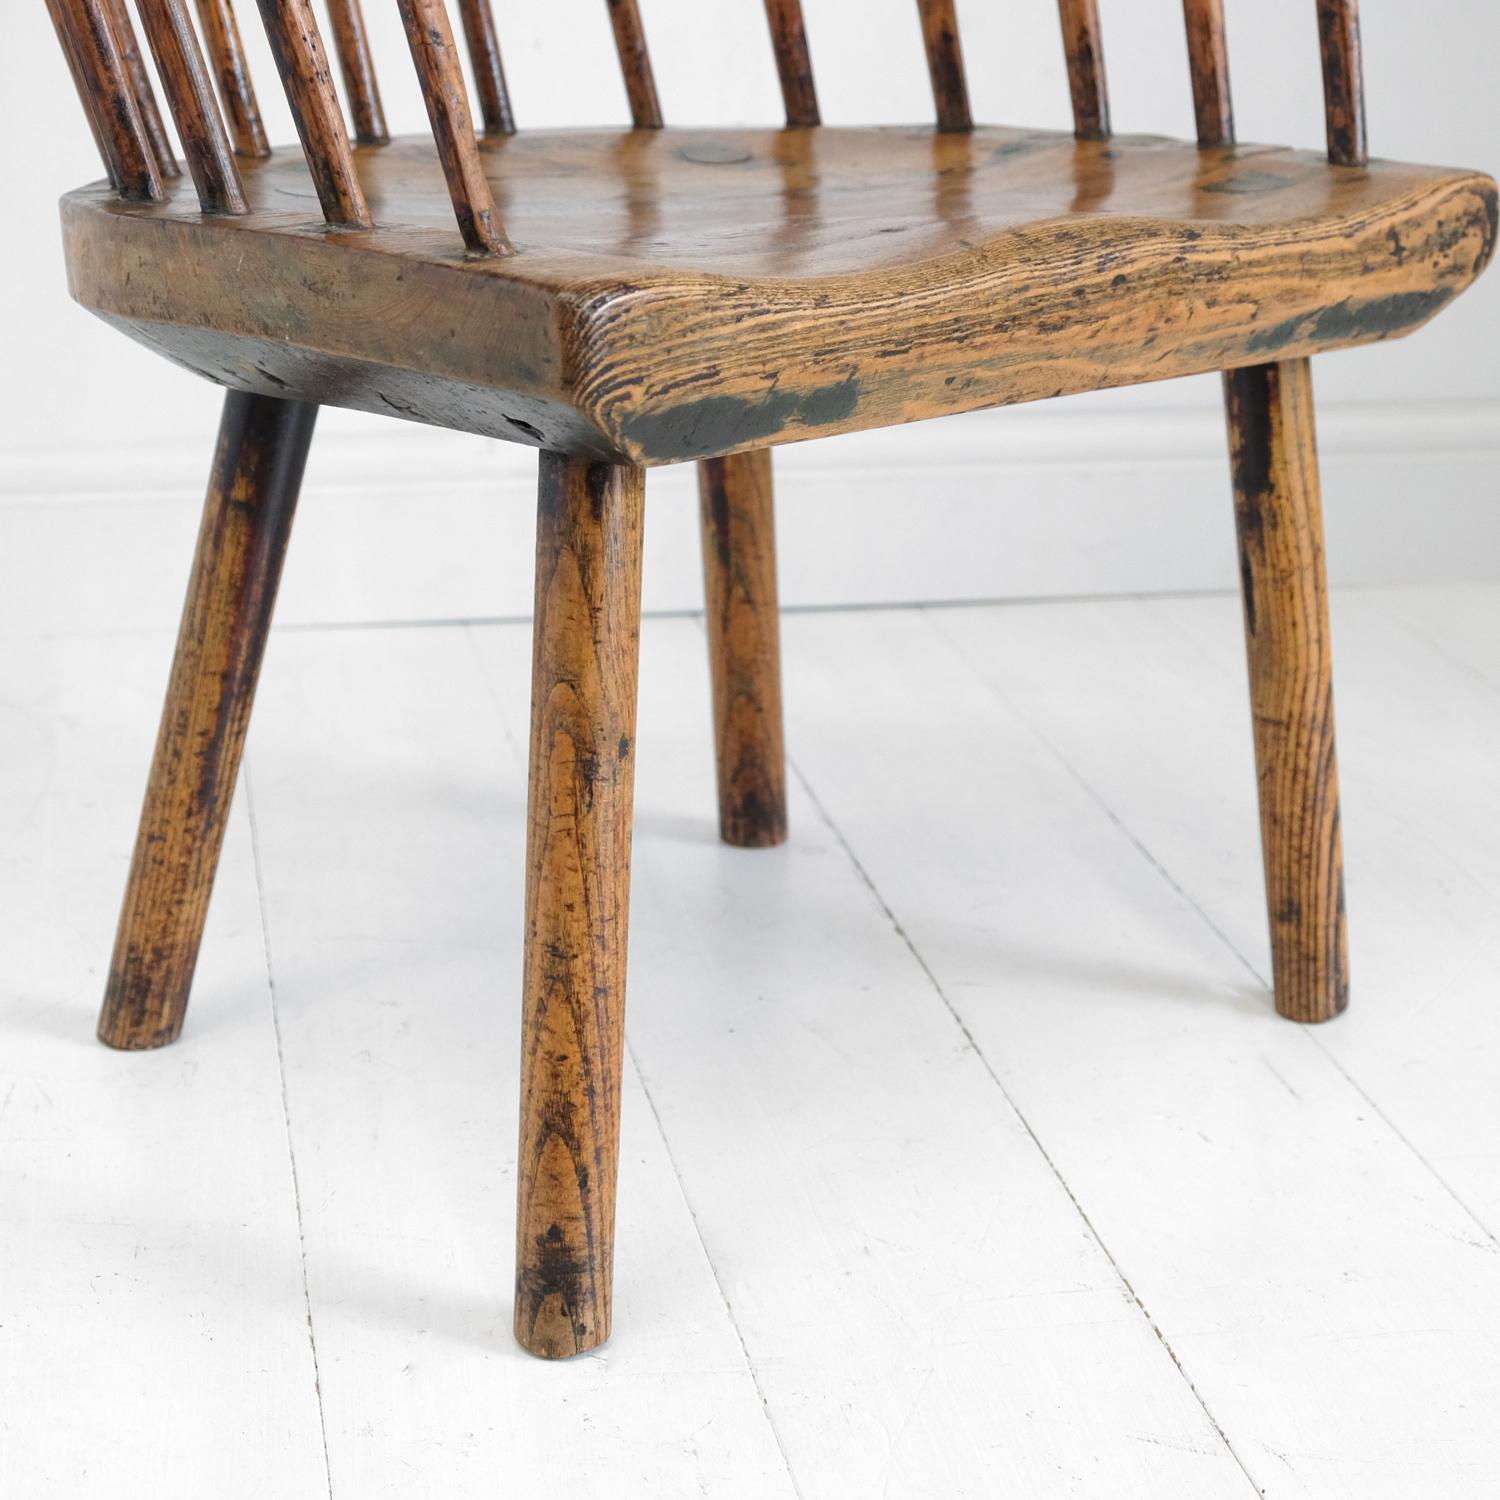 Ash Primitive Welsh Stick Chair, Vernacular Windsor, Country Armchair